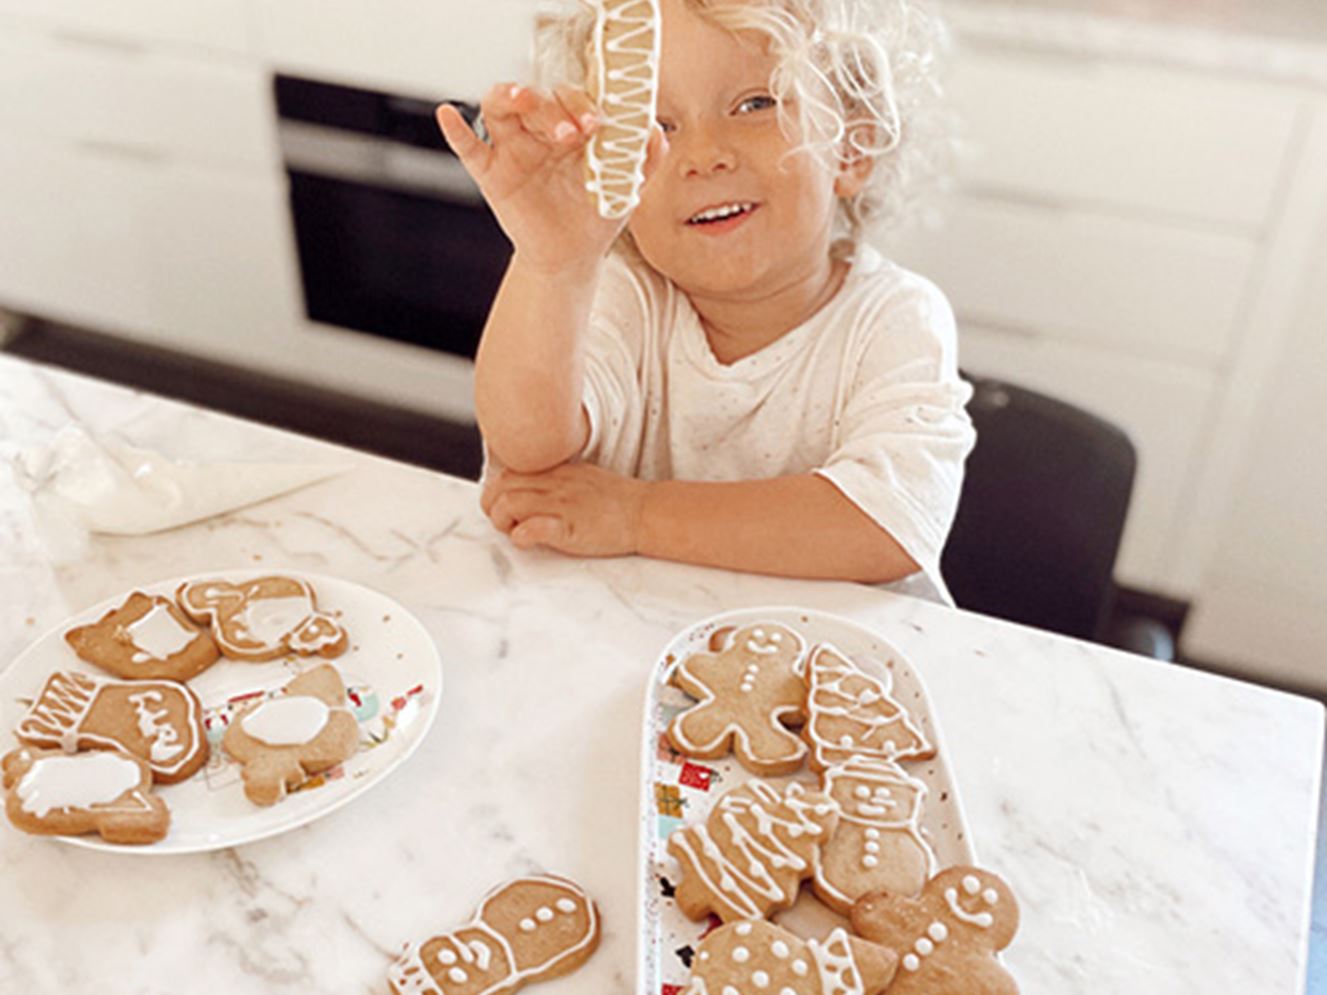 Toddler at kitchen bench with plate of Christmas gingerbread cookies. 